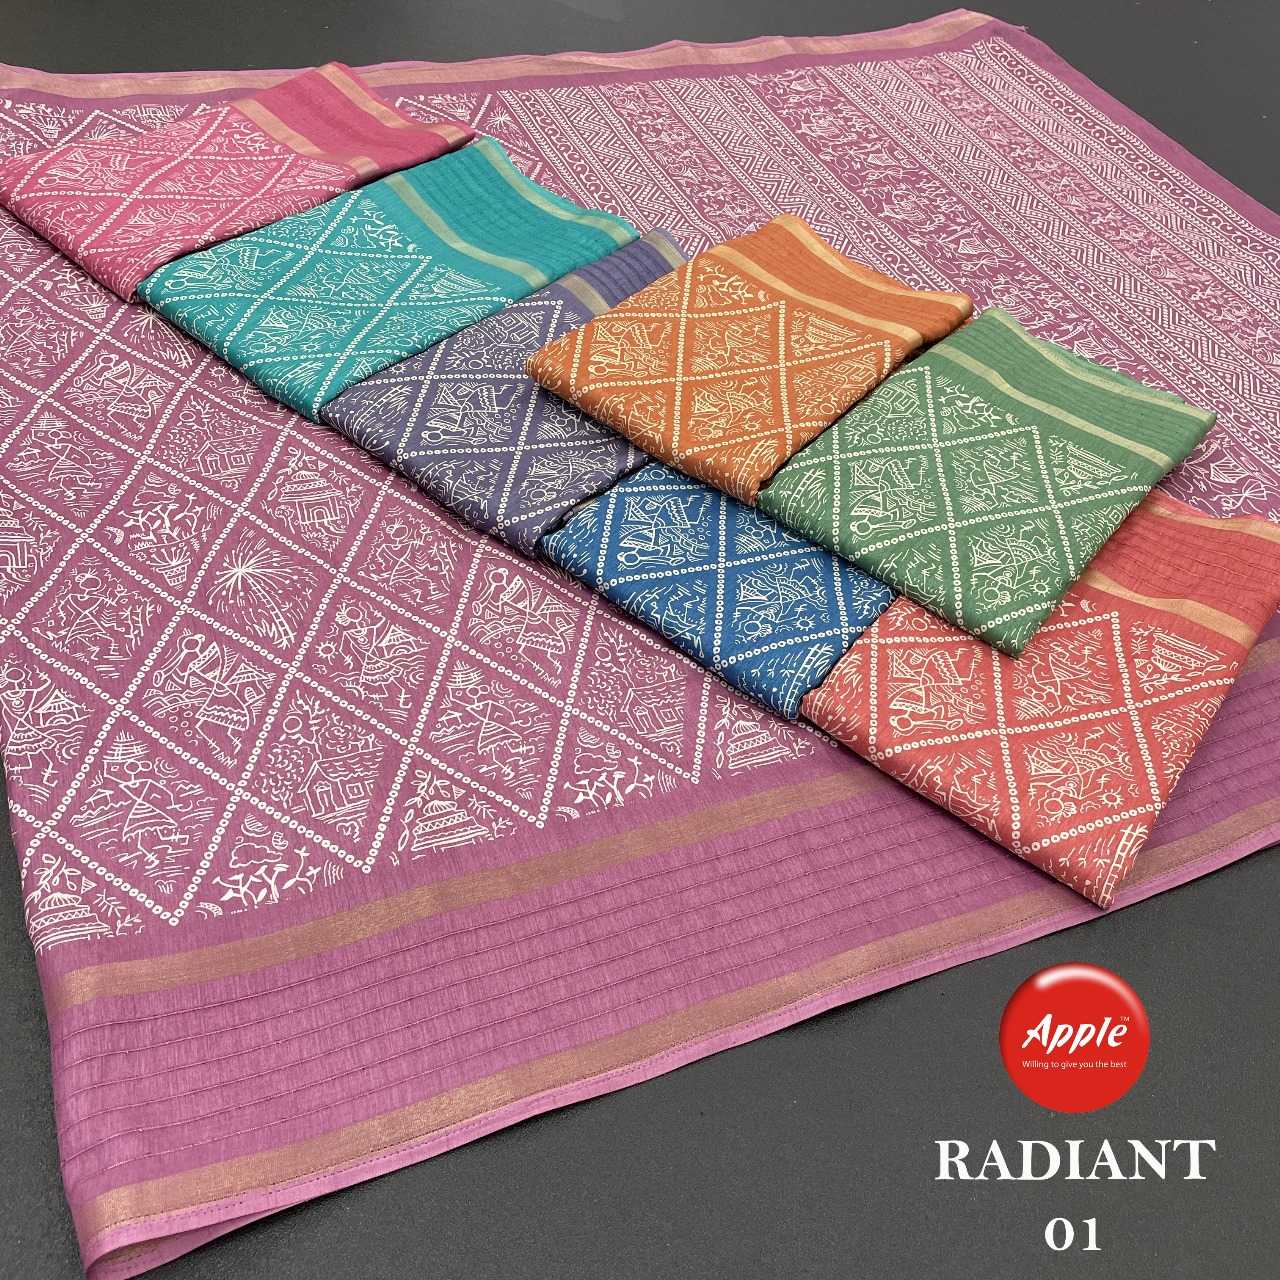 apple radiant vol 1 fancy dola sequence border colour matching sarees